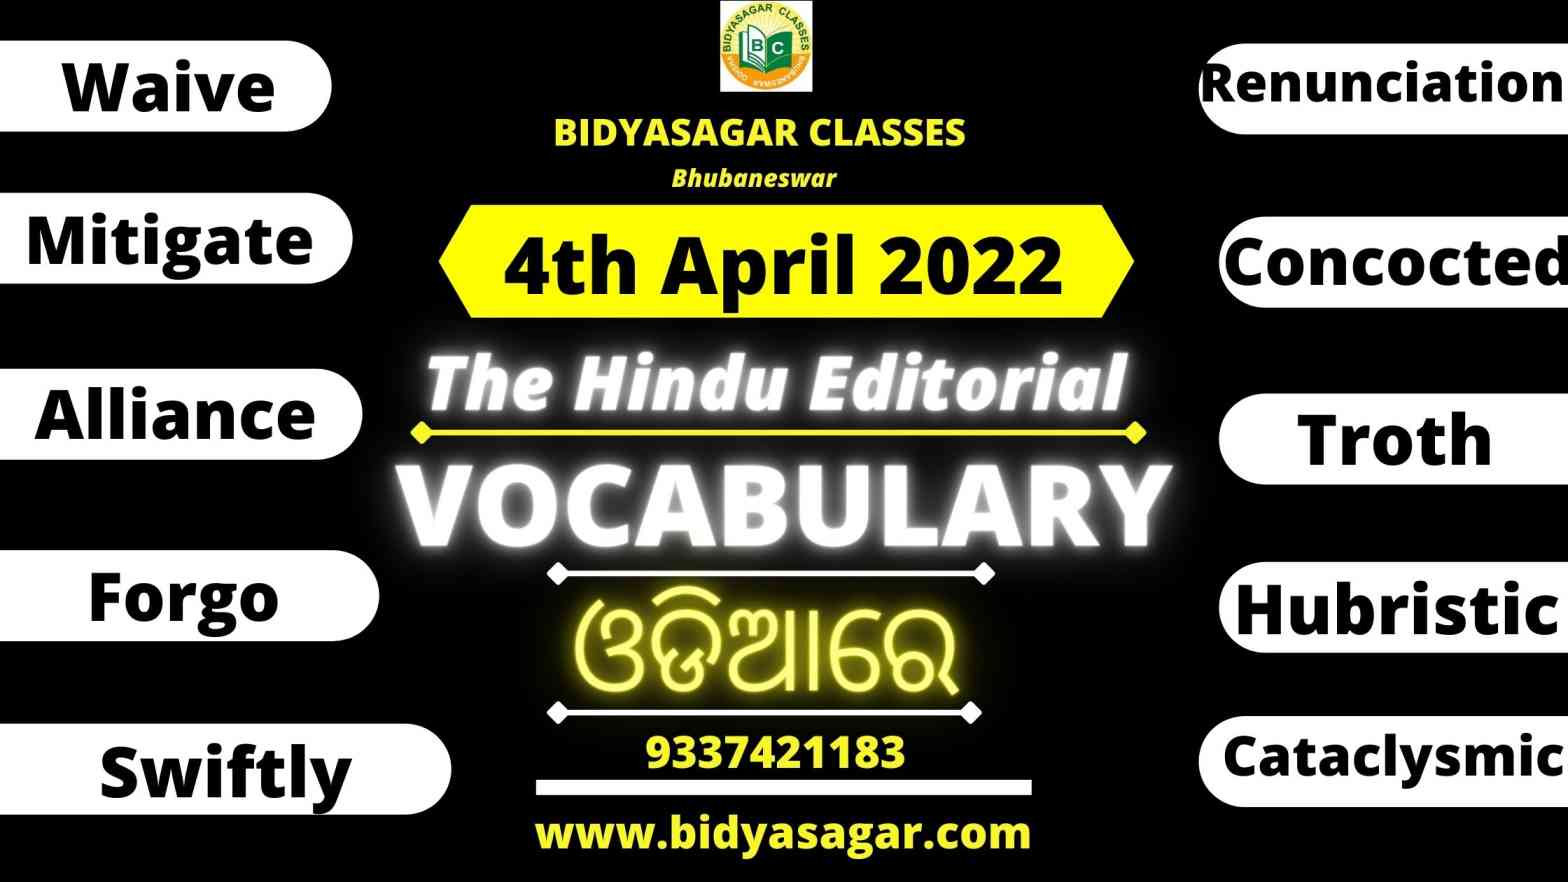 The Hindu Editorial Vocabulary of 4th April 2022